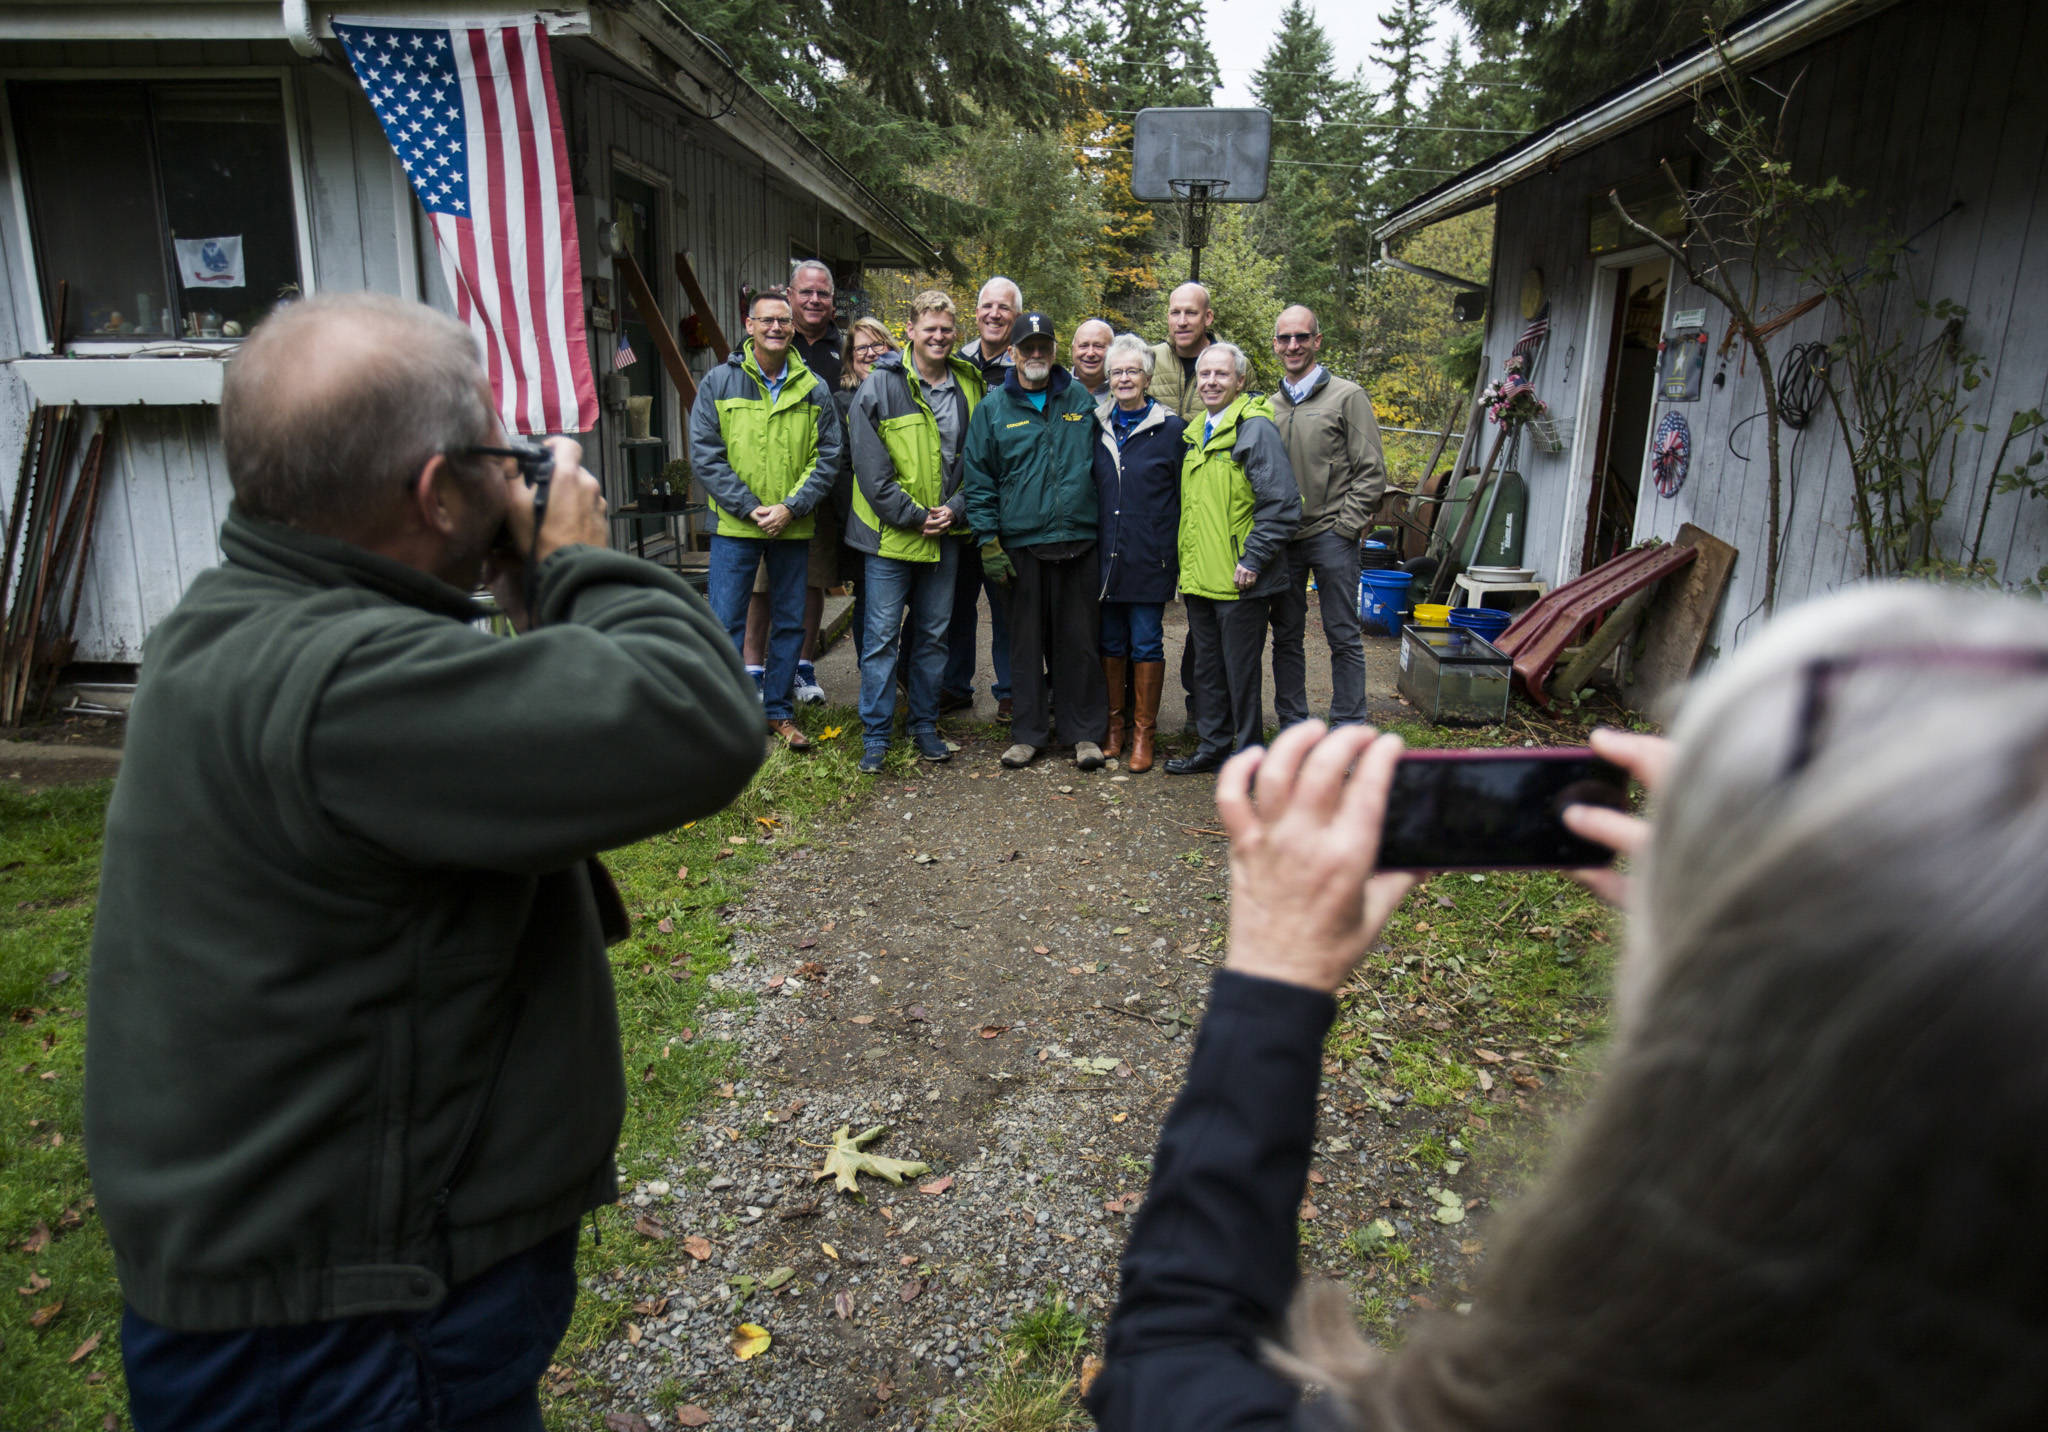 A group of friends, family and Snohomish County officials gather for a group photo at Jim Corcoran’s home in Bothell on Oct. 18. Olivia Vanni/staff photo